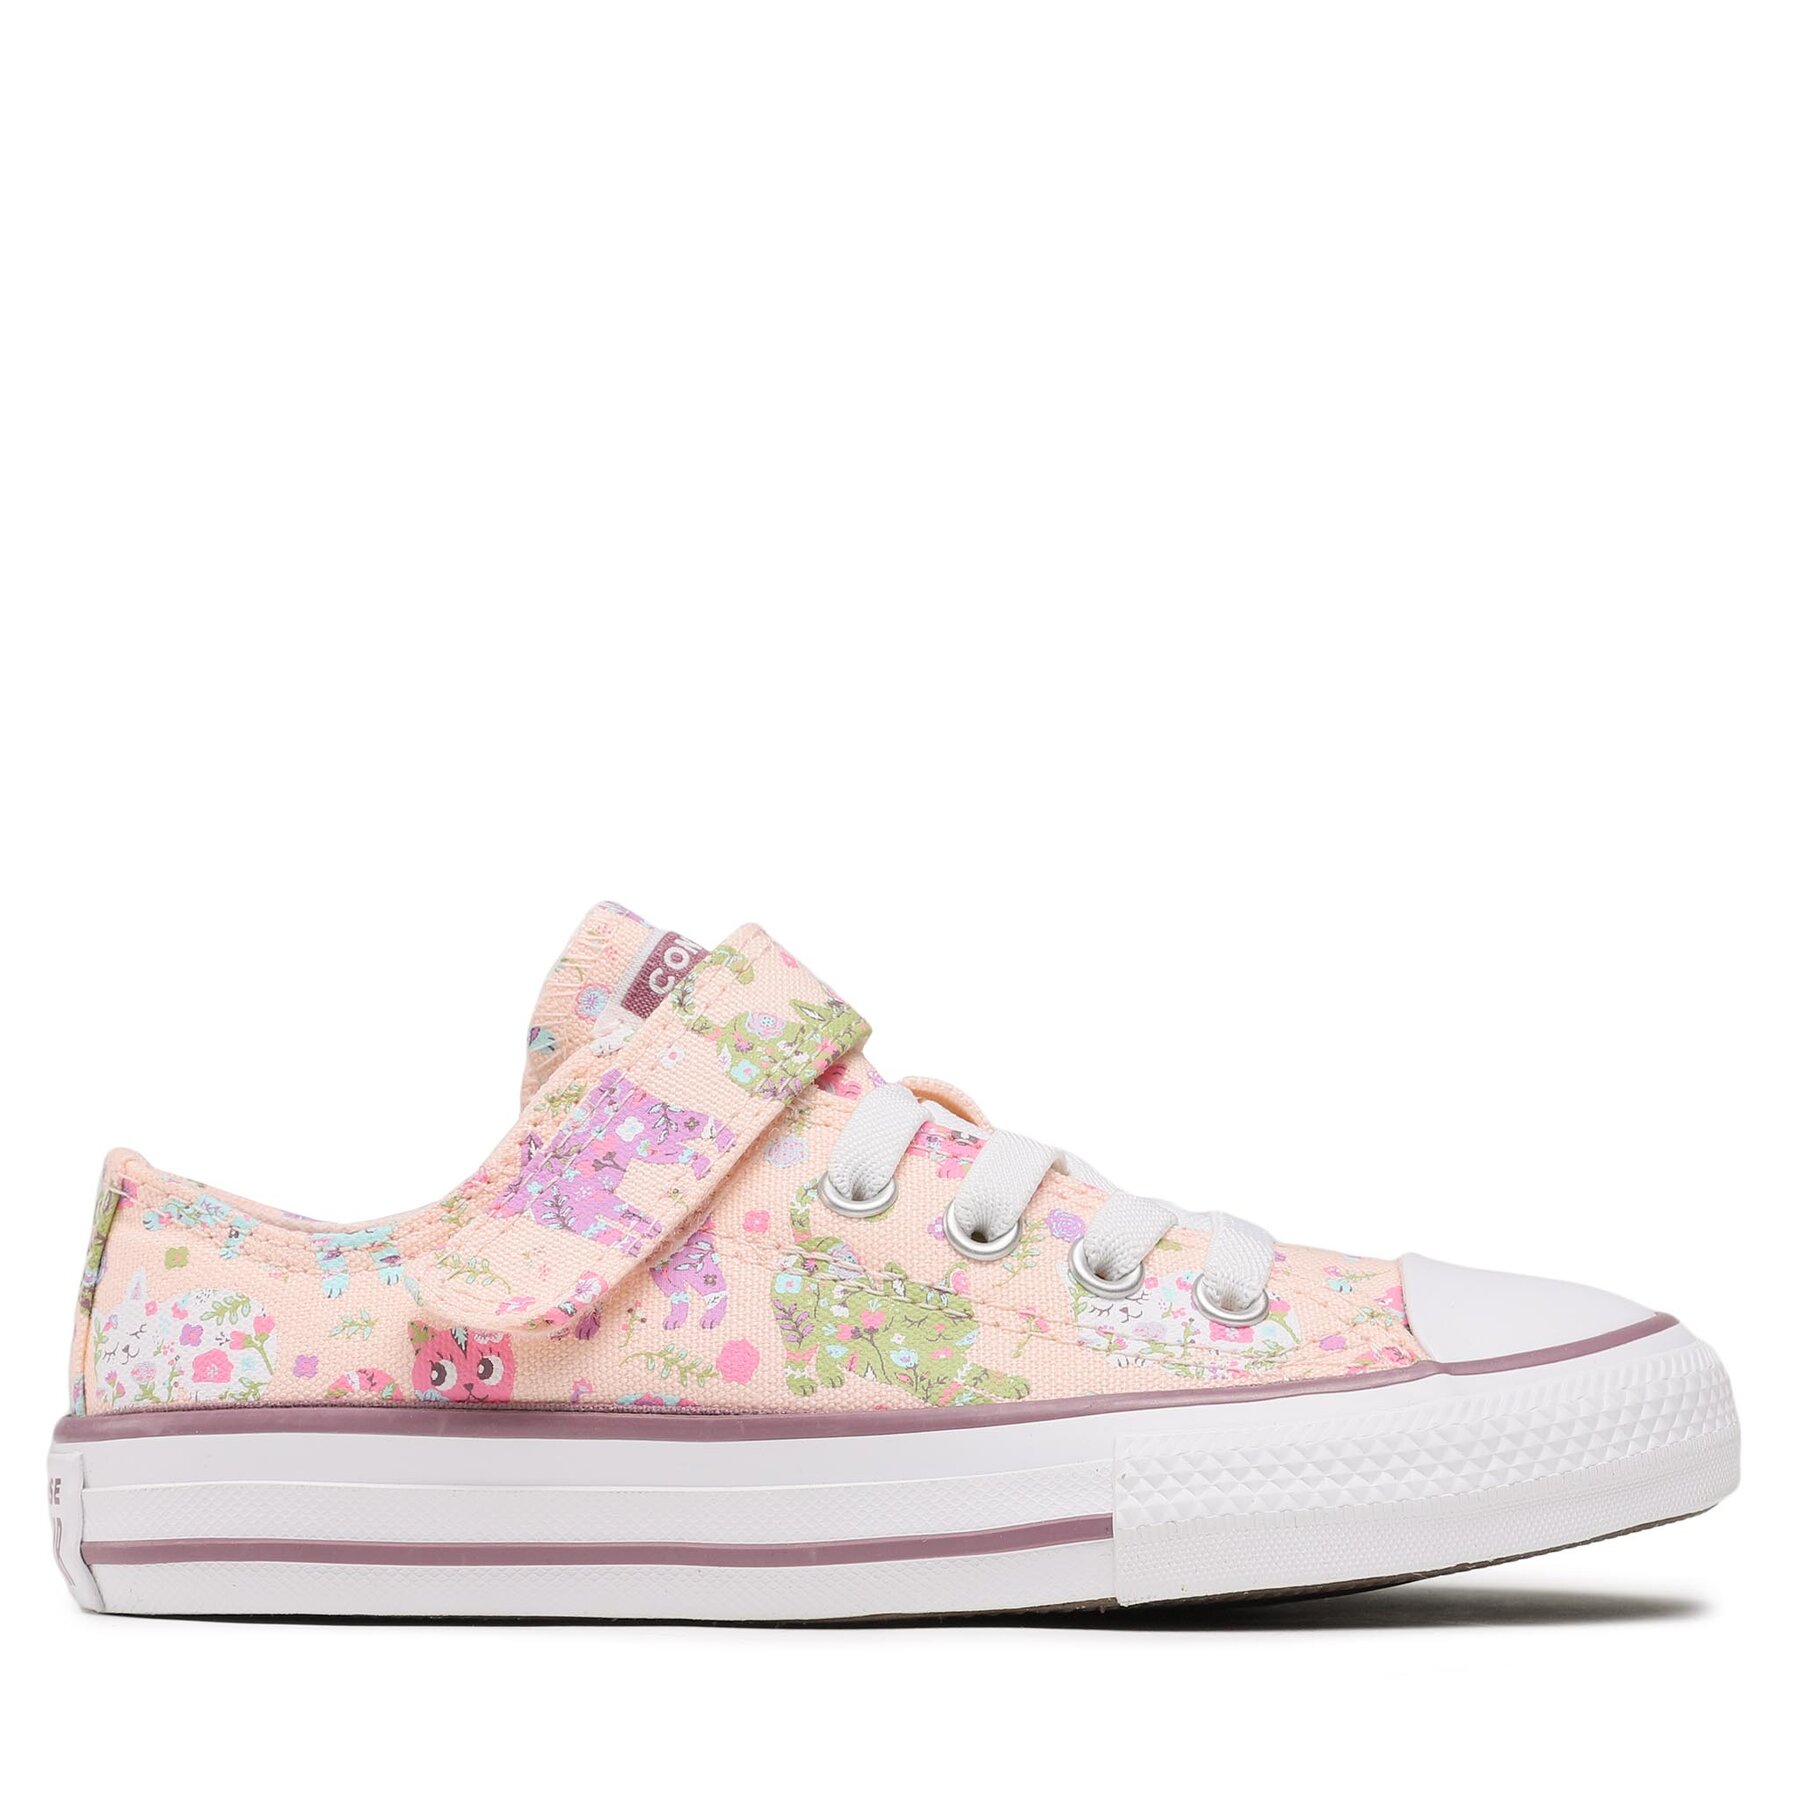 Sneakers aus Stoff Converse Chuck Taylor All Star 1V A04761C Light Pink von Converse